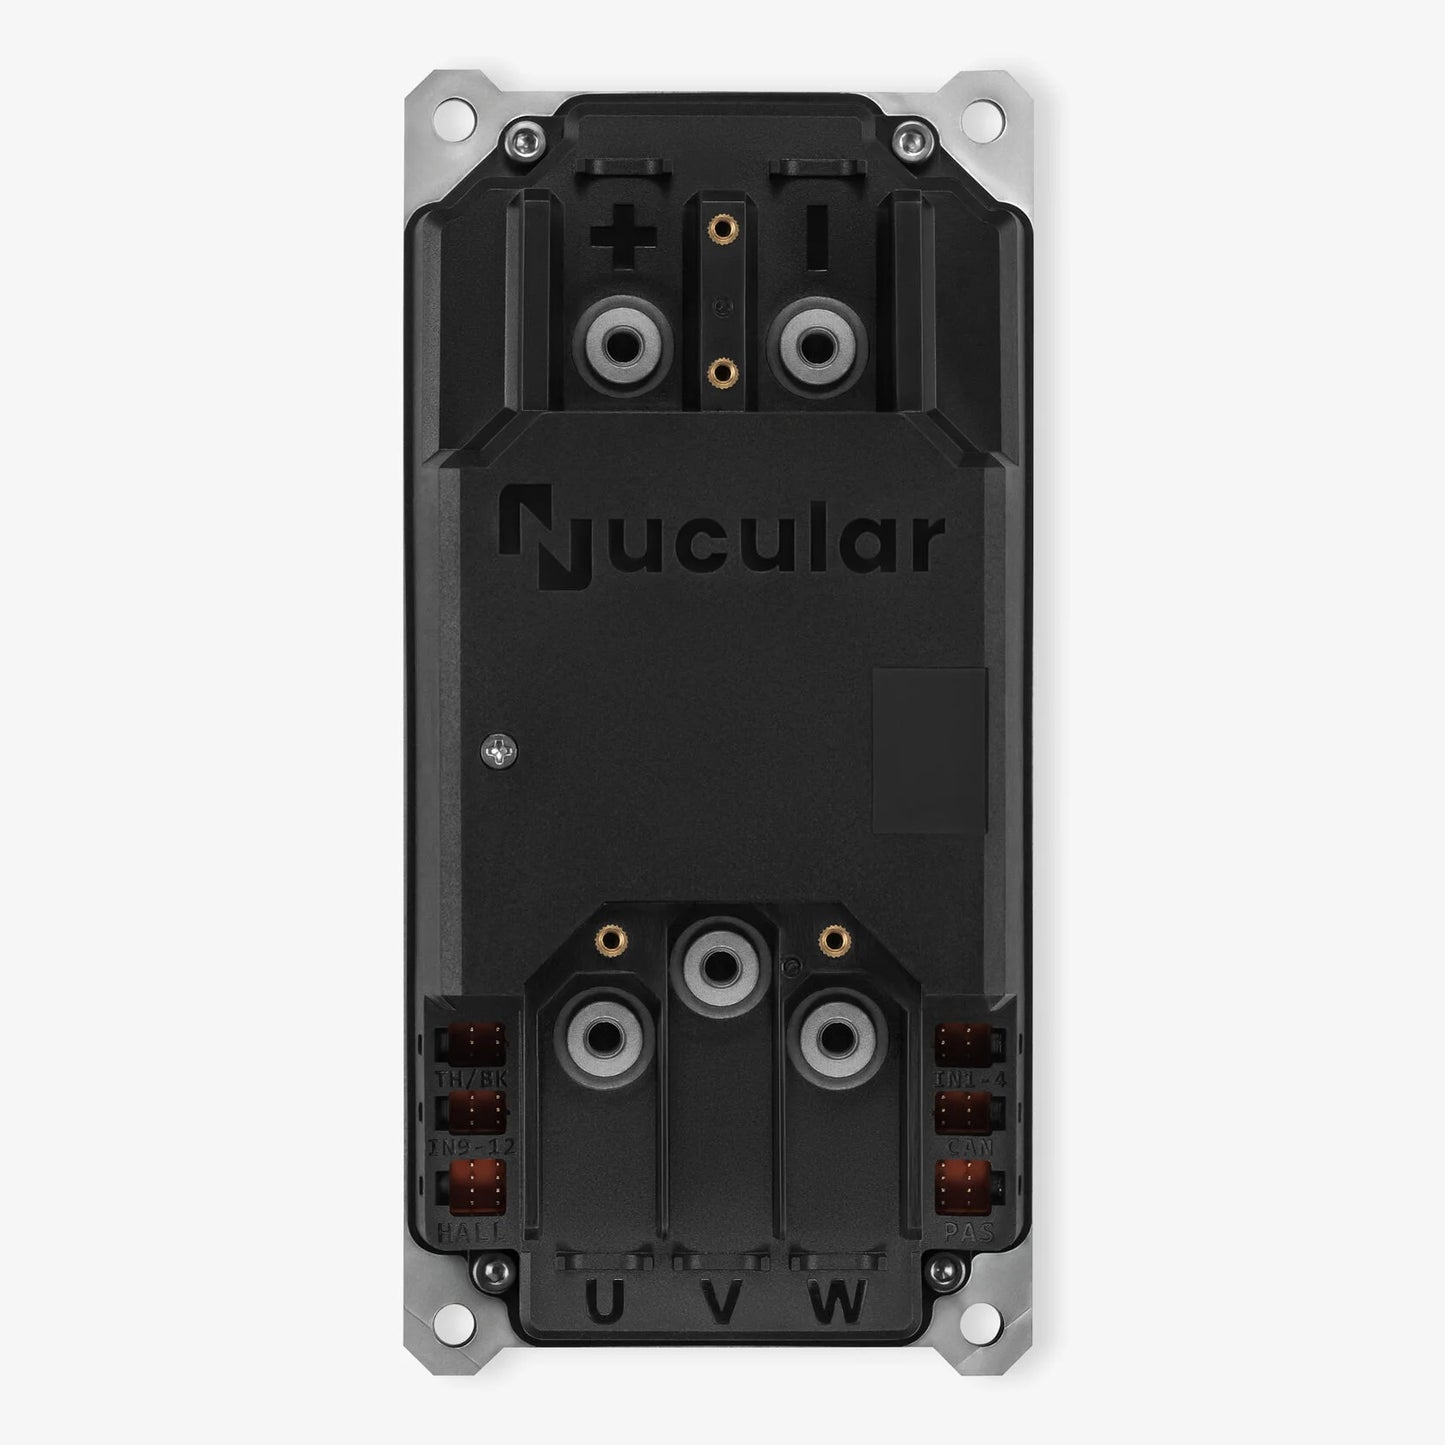 Nucular controller 24f with Display